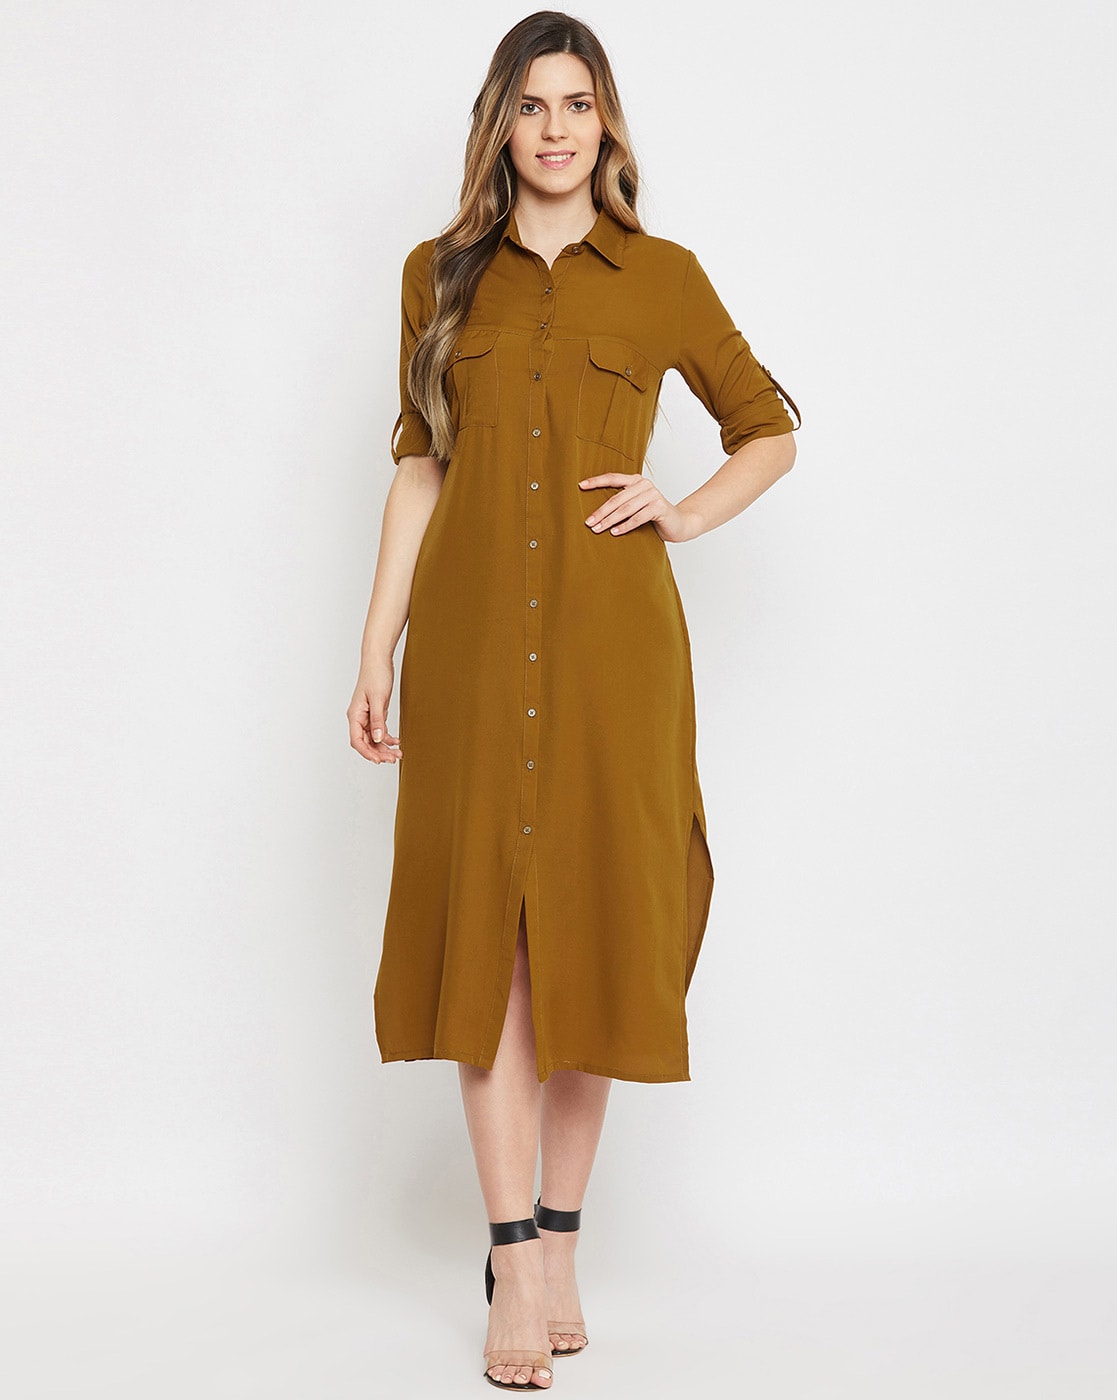 Buy Khaki Dresses for Women by COLOR ...